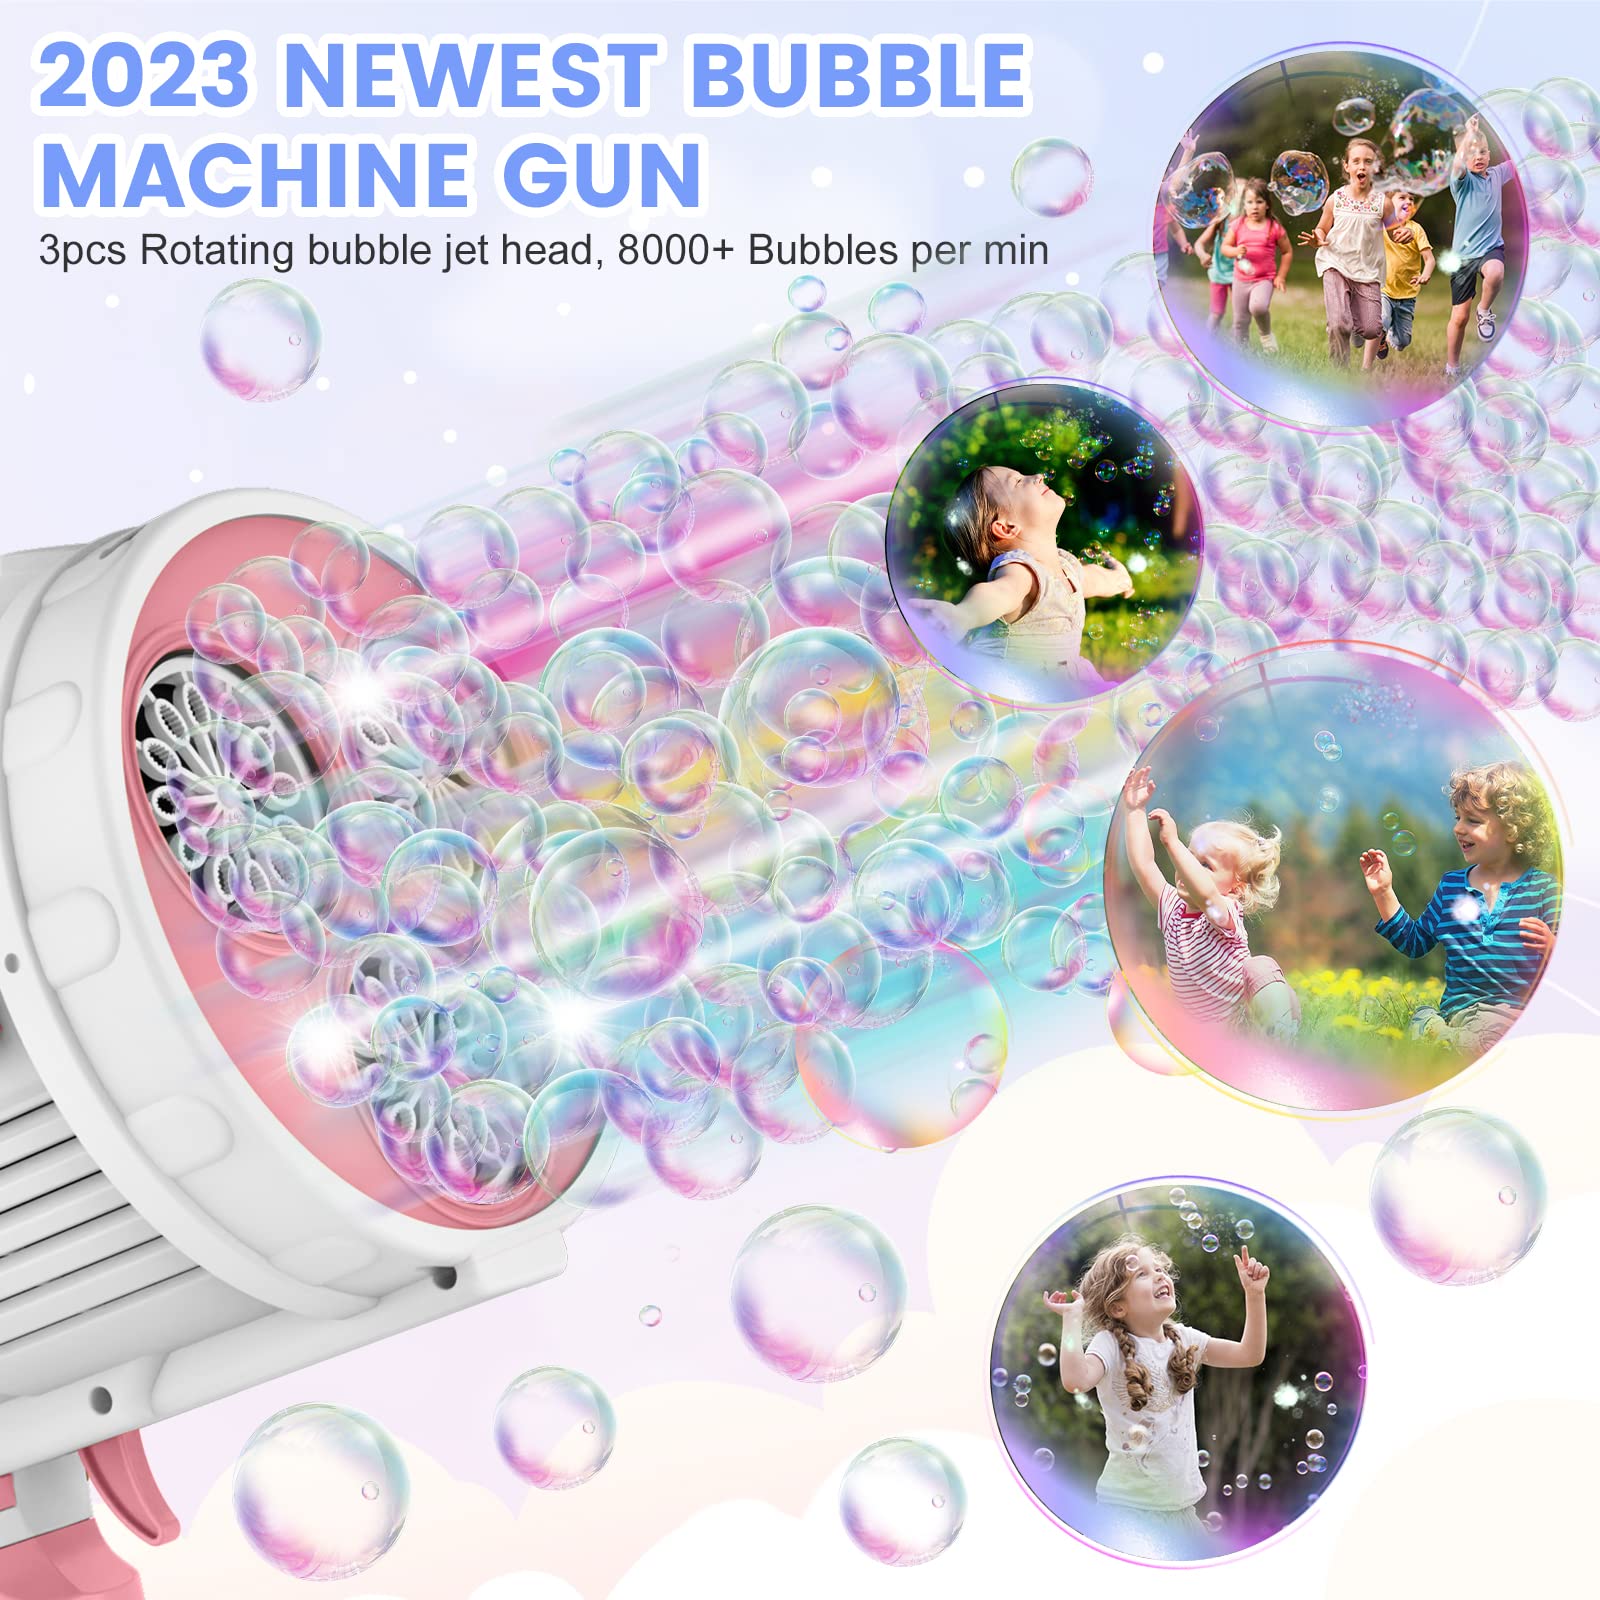 Automatic Christmas Bubble Machine Gun, 36 Holes Bubble Blaster Gun with LED Lights -Outdoor Indoor Bubble Gun Toy Gift for Kids Adults Birthday, Wedding, Holiday, Christmas Party Favor